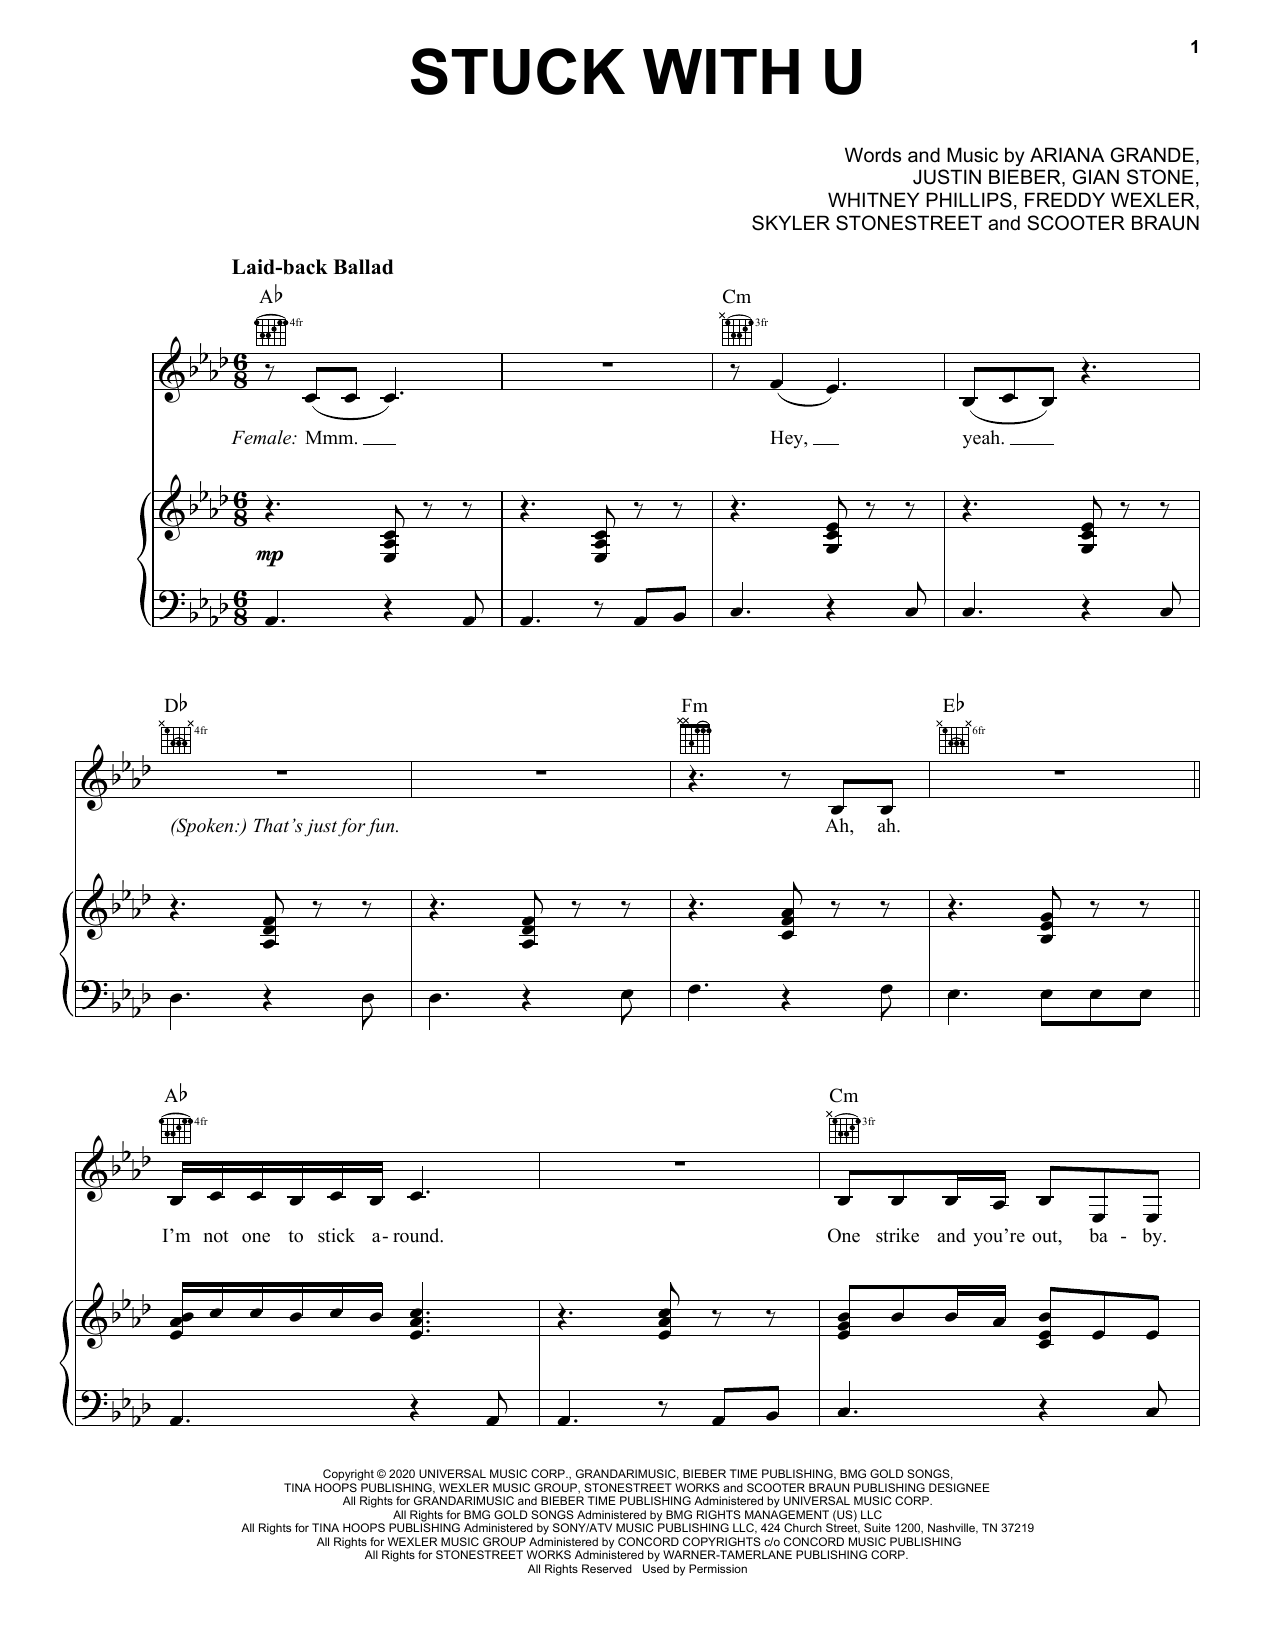 Ariana Grande "Stuck with U" Sheet Music Notes, Chords ft. Justin Bieber | Pop Piano, Vocal ...